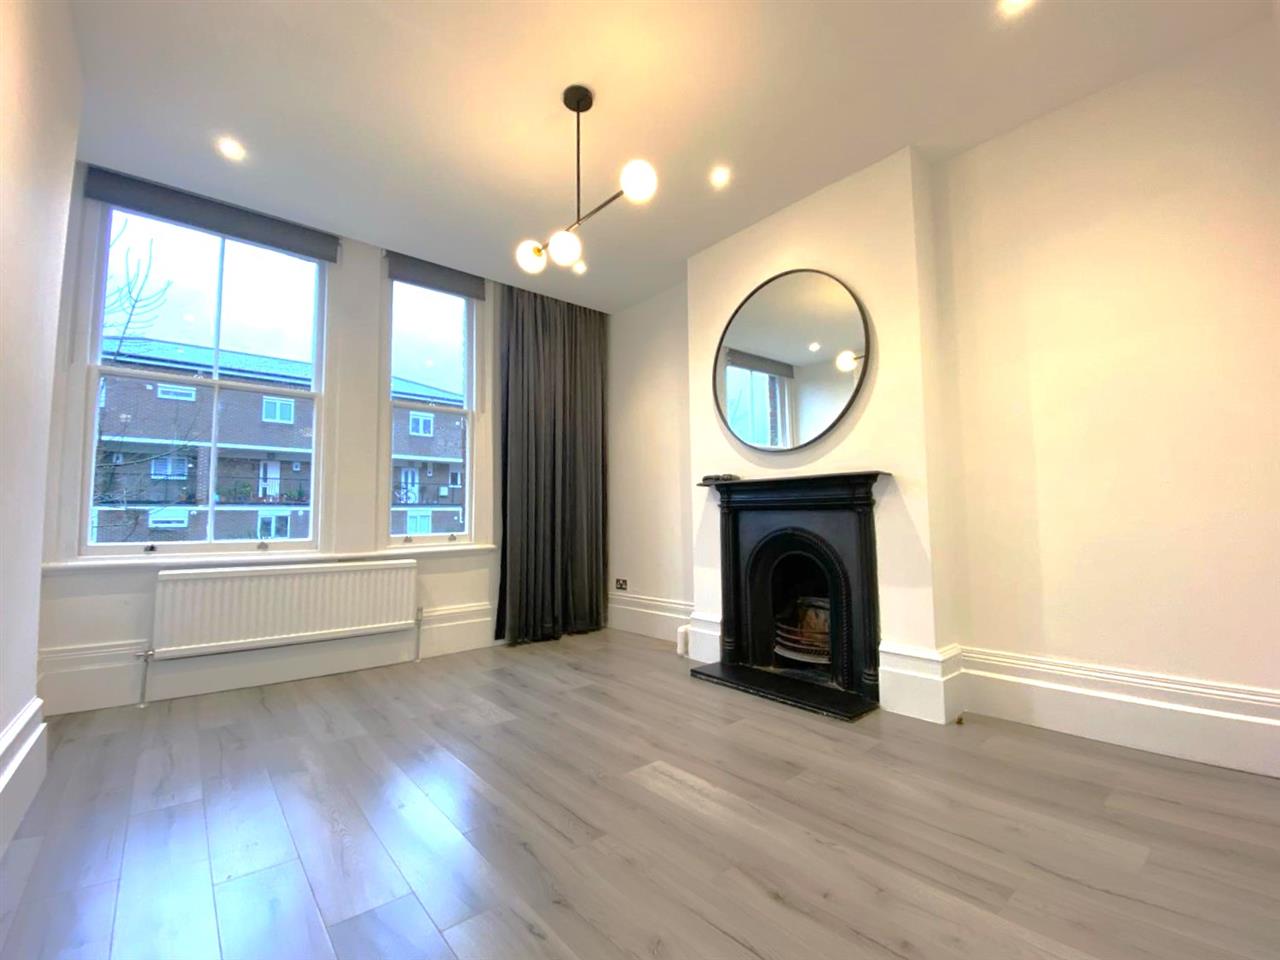 1 bed flat to rent in Hungerford Road - Property Image 1